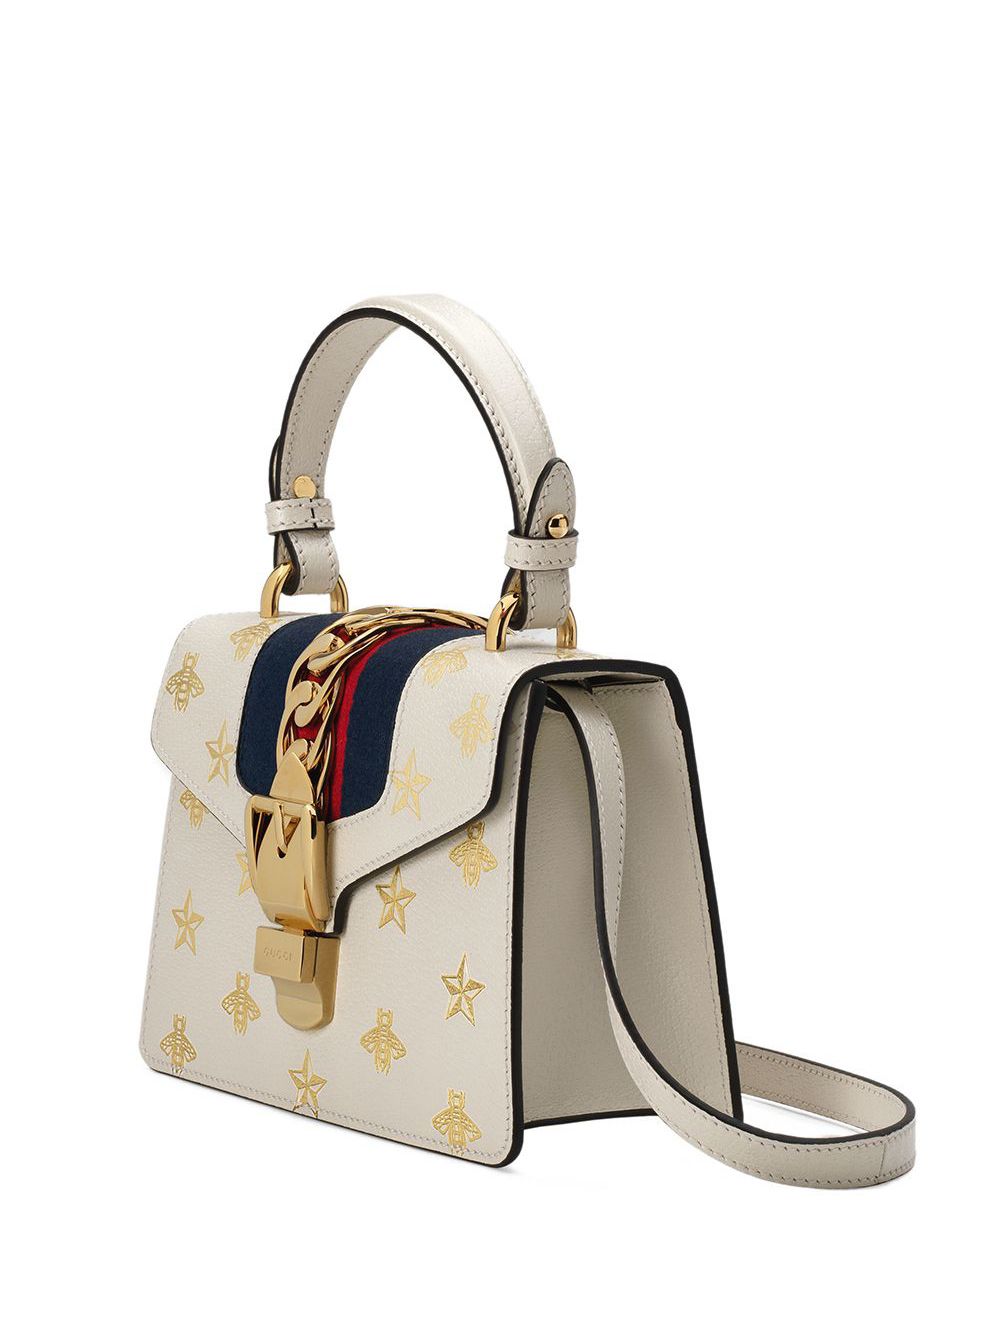 Authenticated Gucci Small Bee Star Sylvie Crossbody White Calf Leather Bag